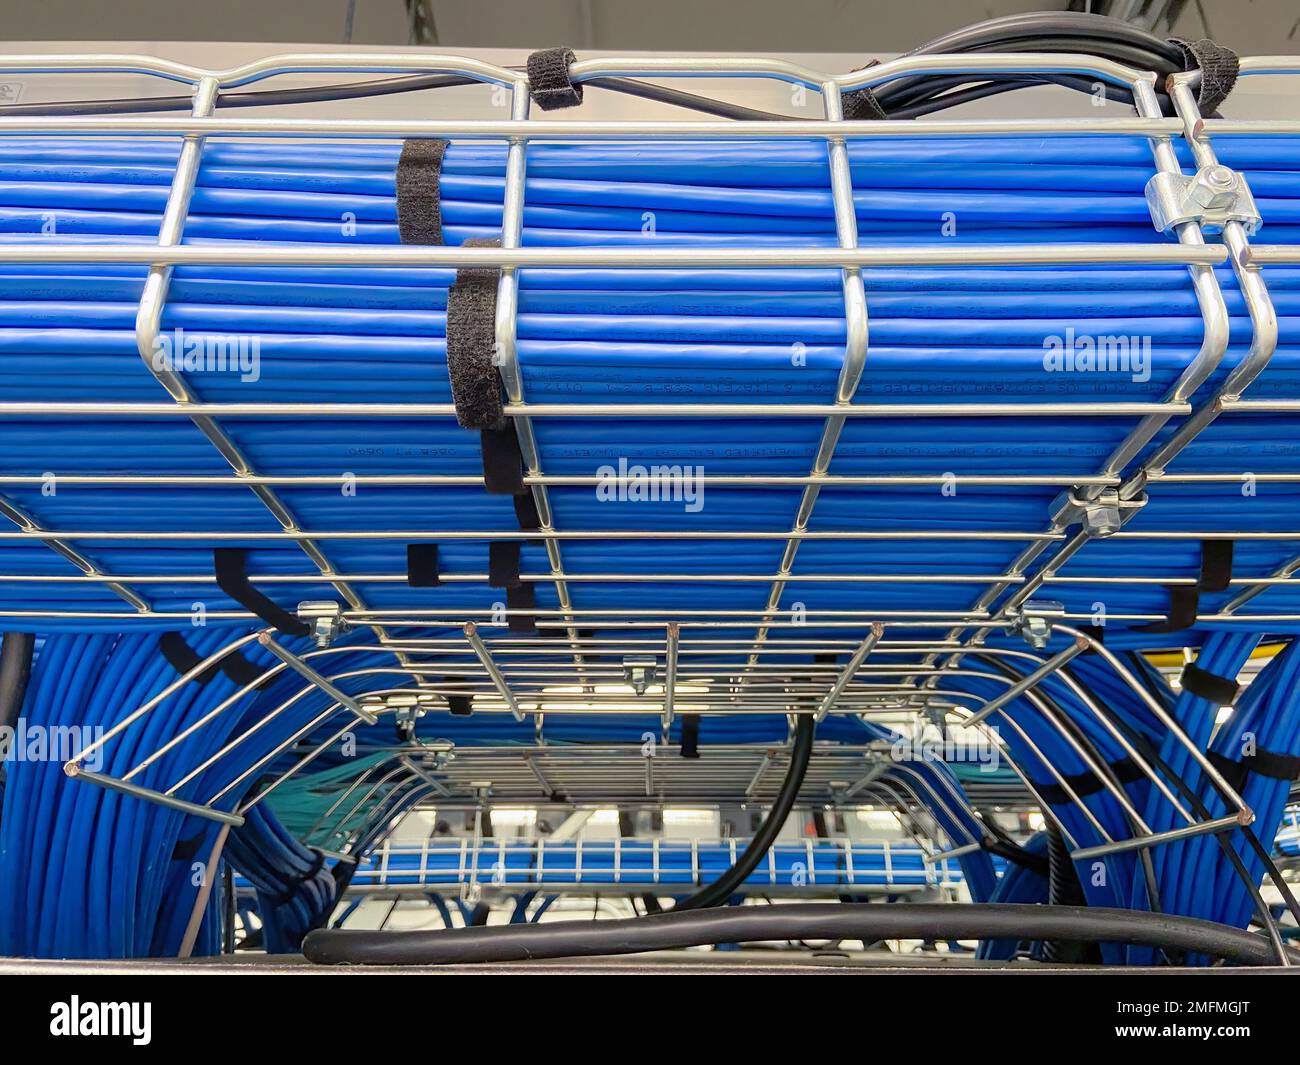 https://c8.alamy.com/comp/2MFMGJT/copper-cable-infrastructure-mounted-on-the-metal-wired-trays-2MFMGJT.jpg